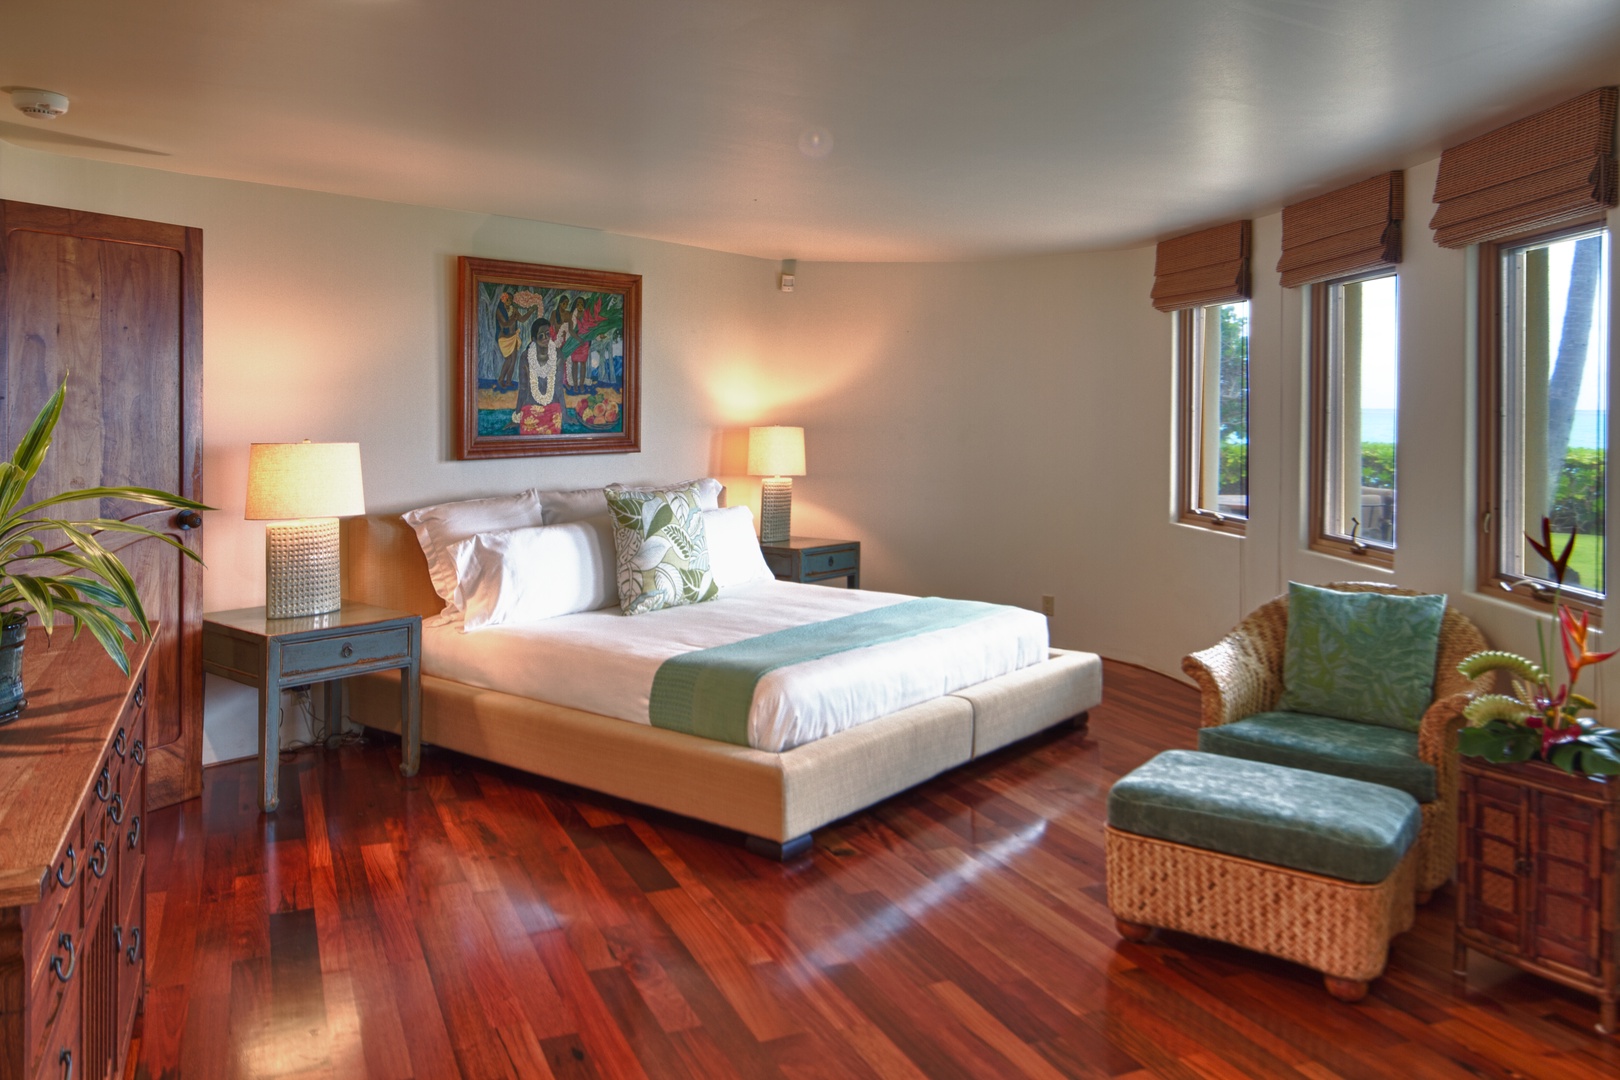 Kailua Vacation Rentals, Paul Mitchell Estate* - Guest Bedroom in Main House, ground level